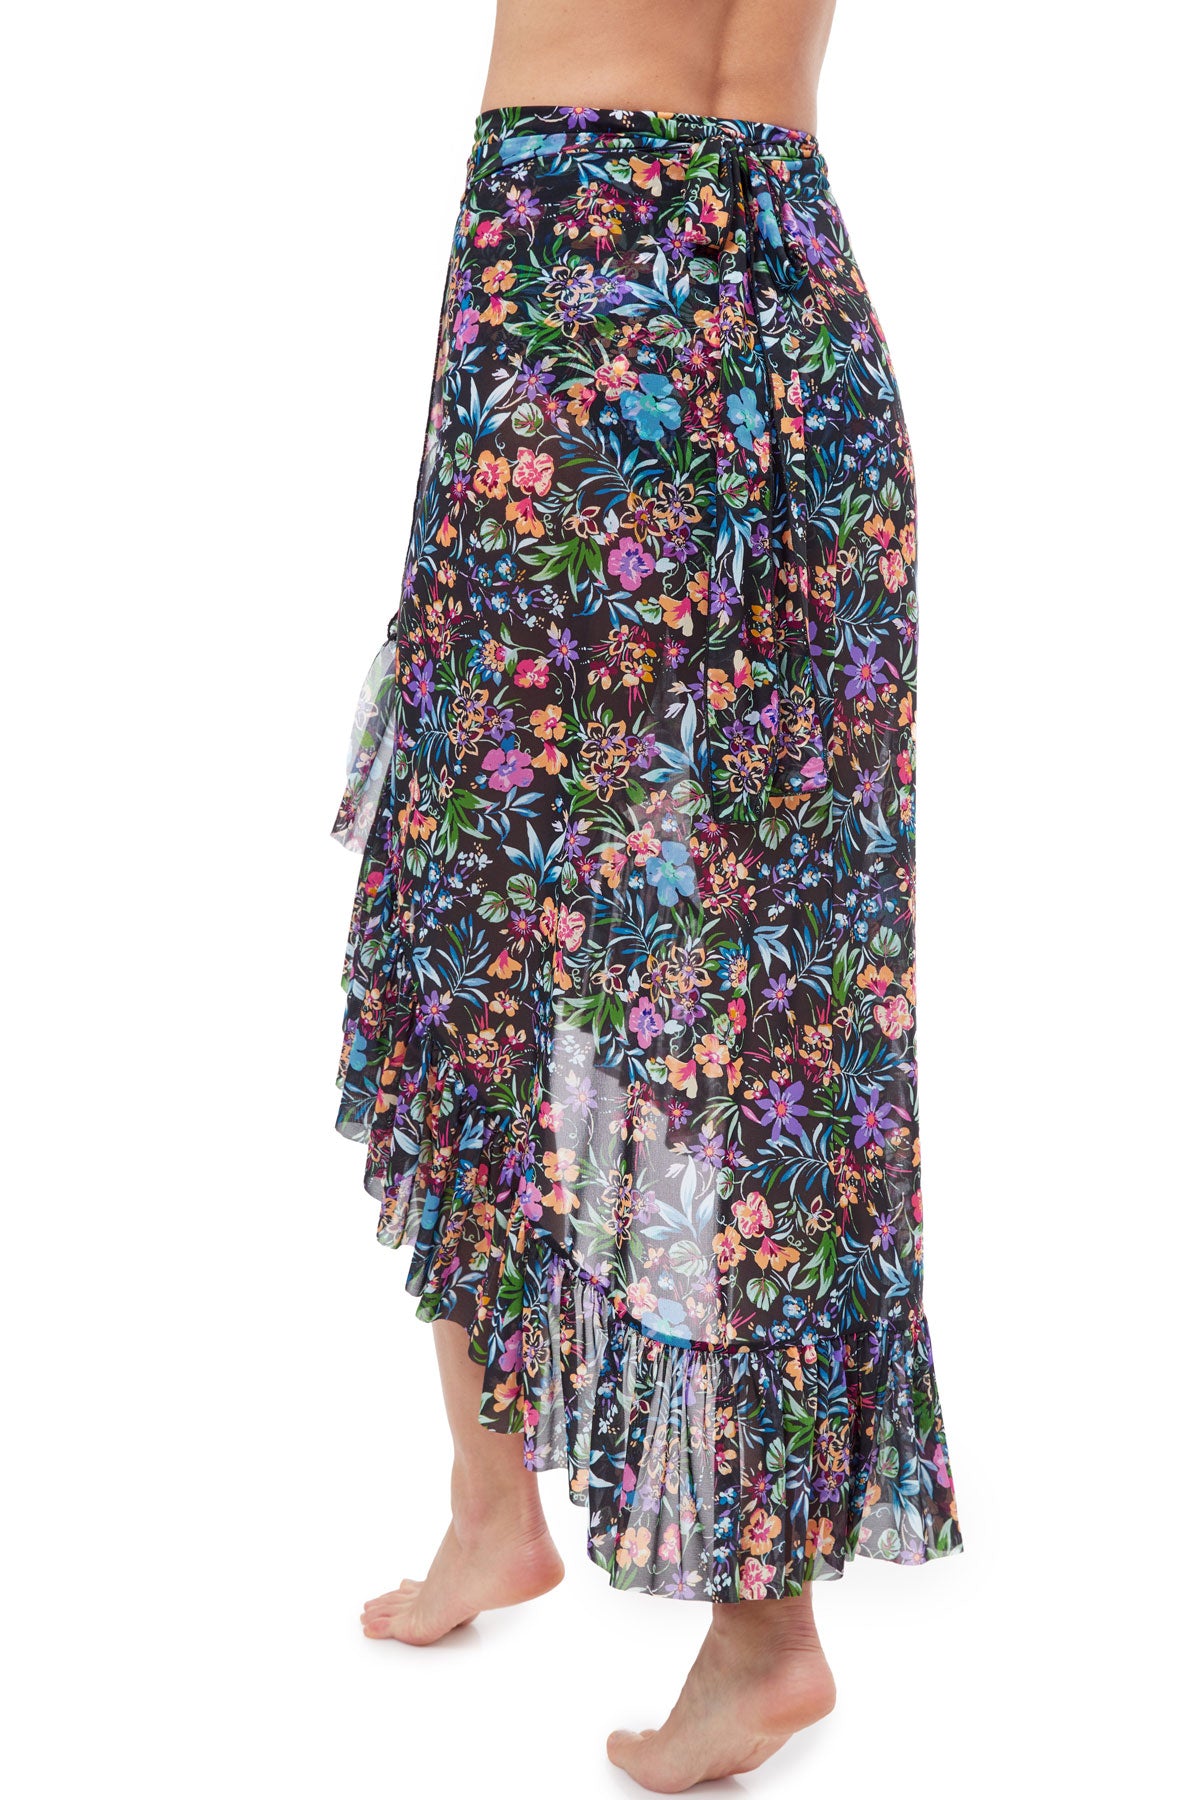 Profile: Flora Ruffled High Low Skirt Cover Up